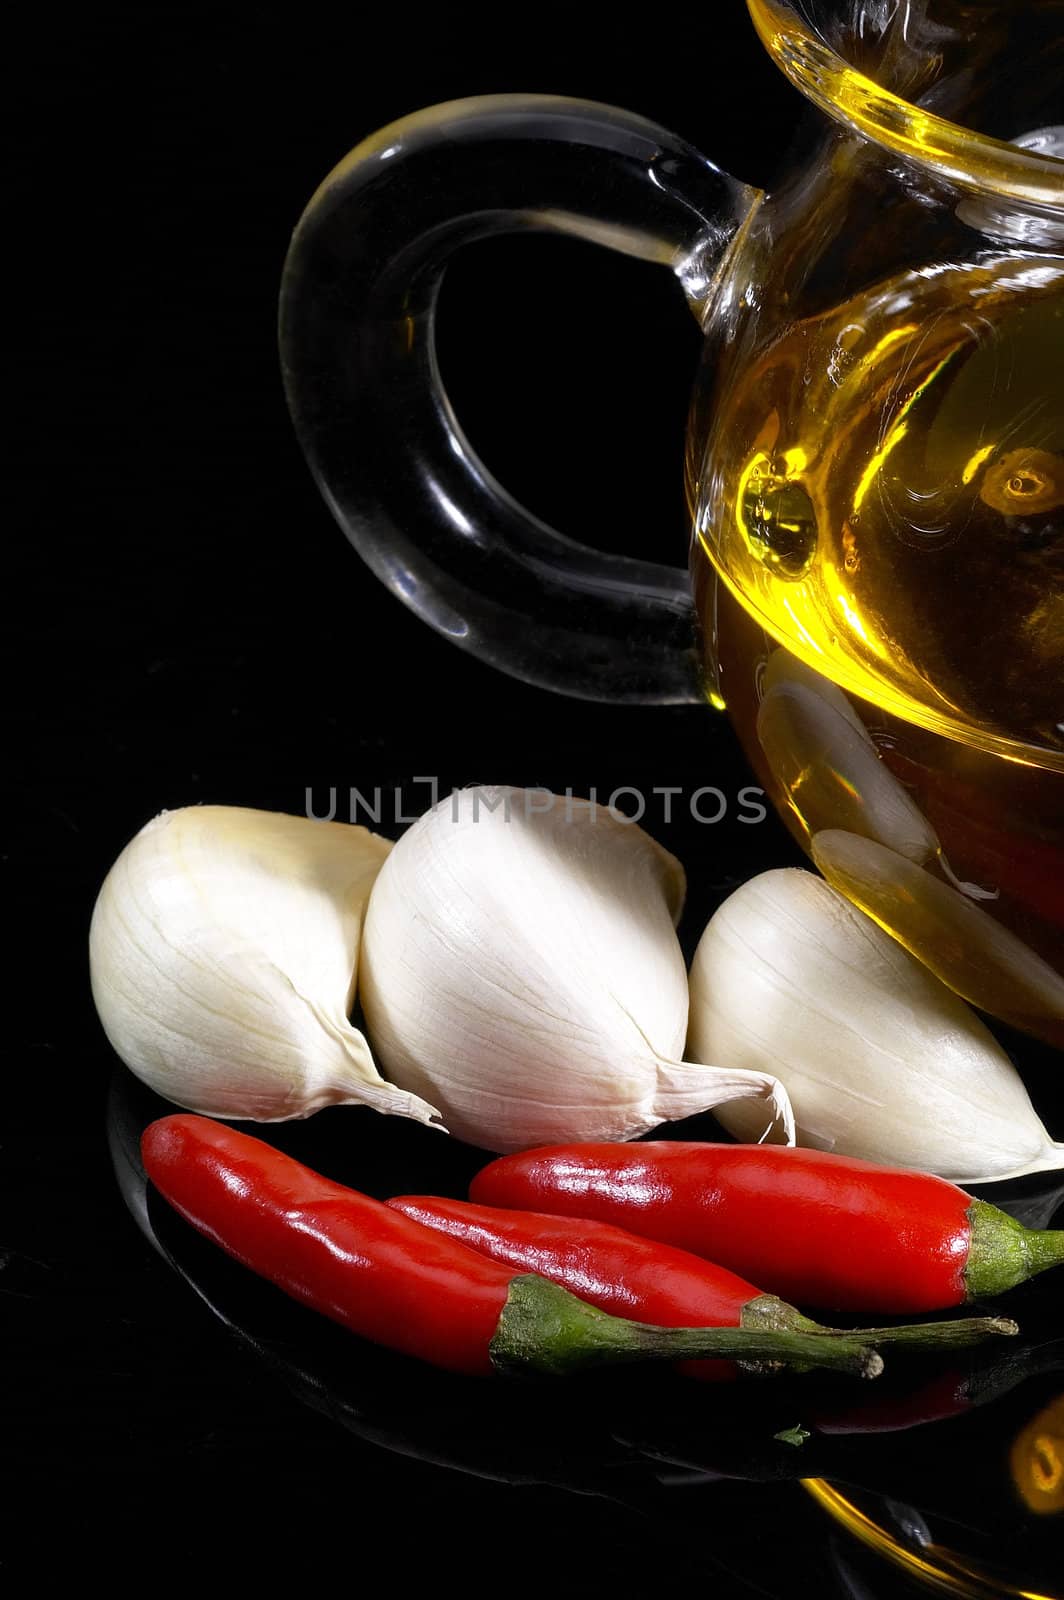 garlic extra virgin olive oil and red chili pepper by keko64